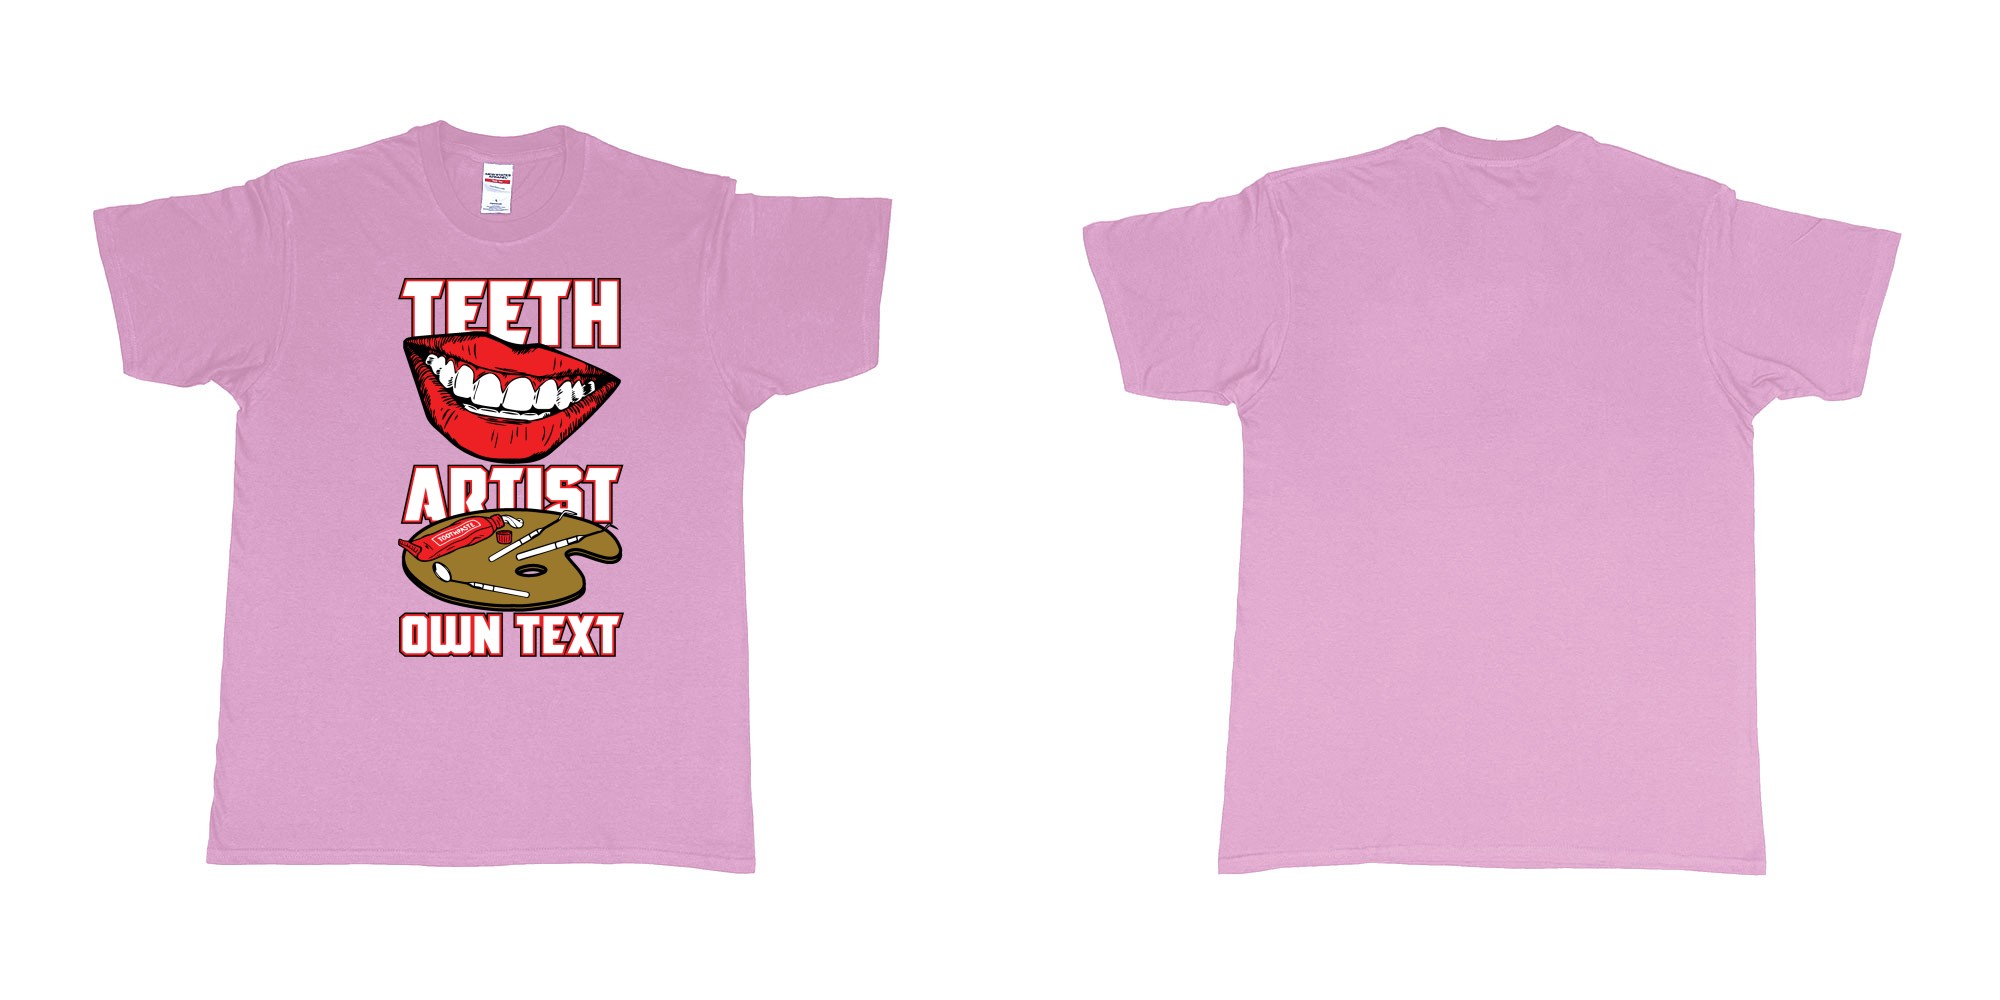 Custom tshirt design teeth artist own custom text tshirt print dentist bali in fabric color light-pink choice your own text made in Bali by The Pirate Way